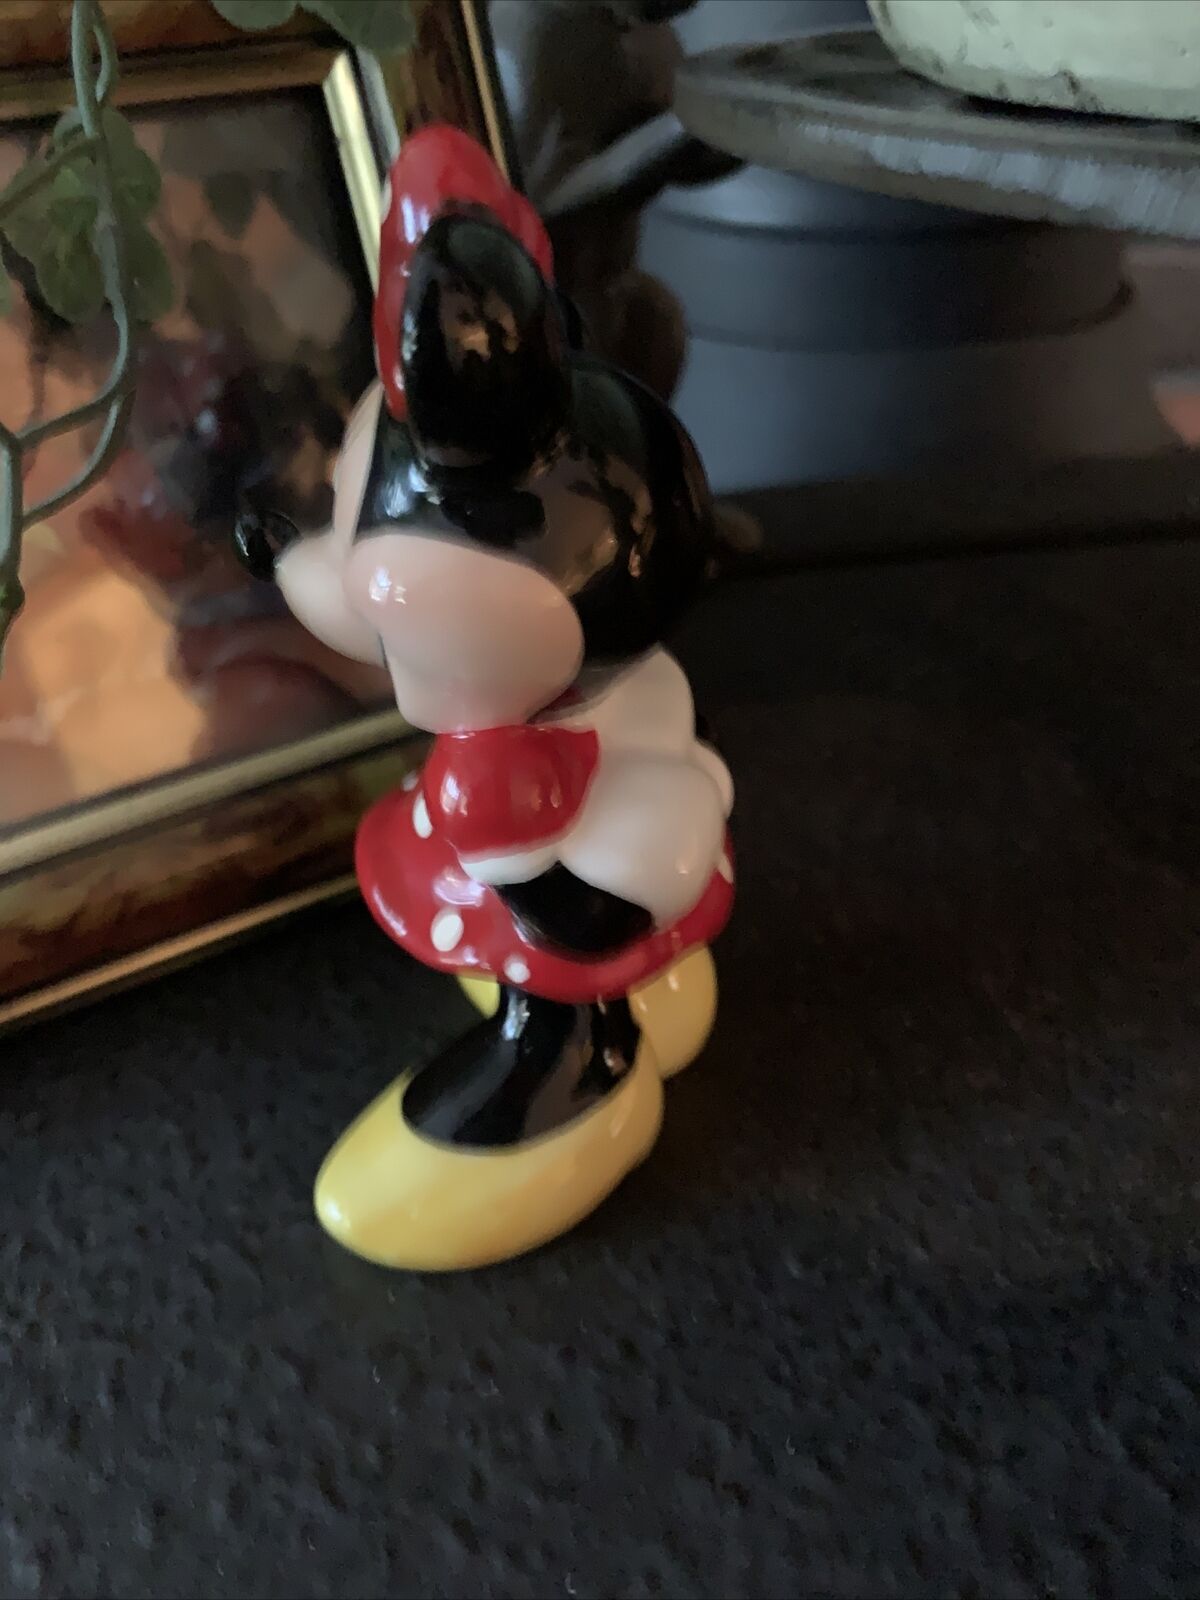 Disney Minnie Mouse Ceramic Figurine Hands Behind Back Eneseco #123498 Used